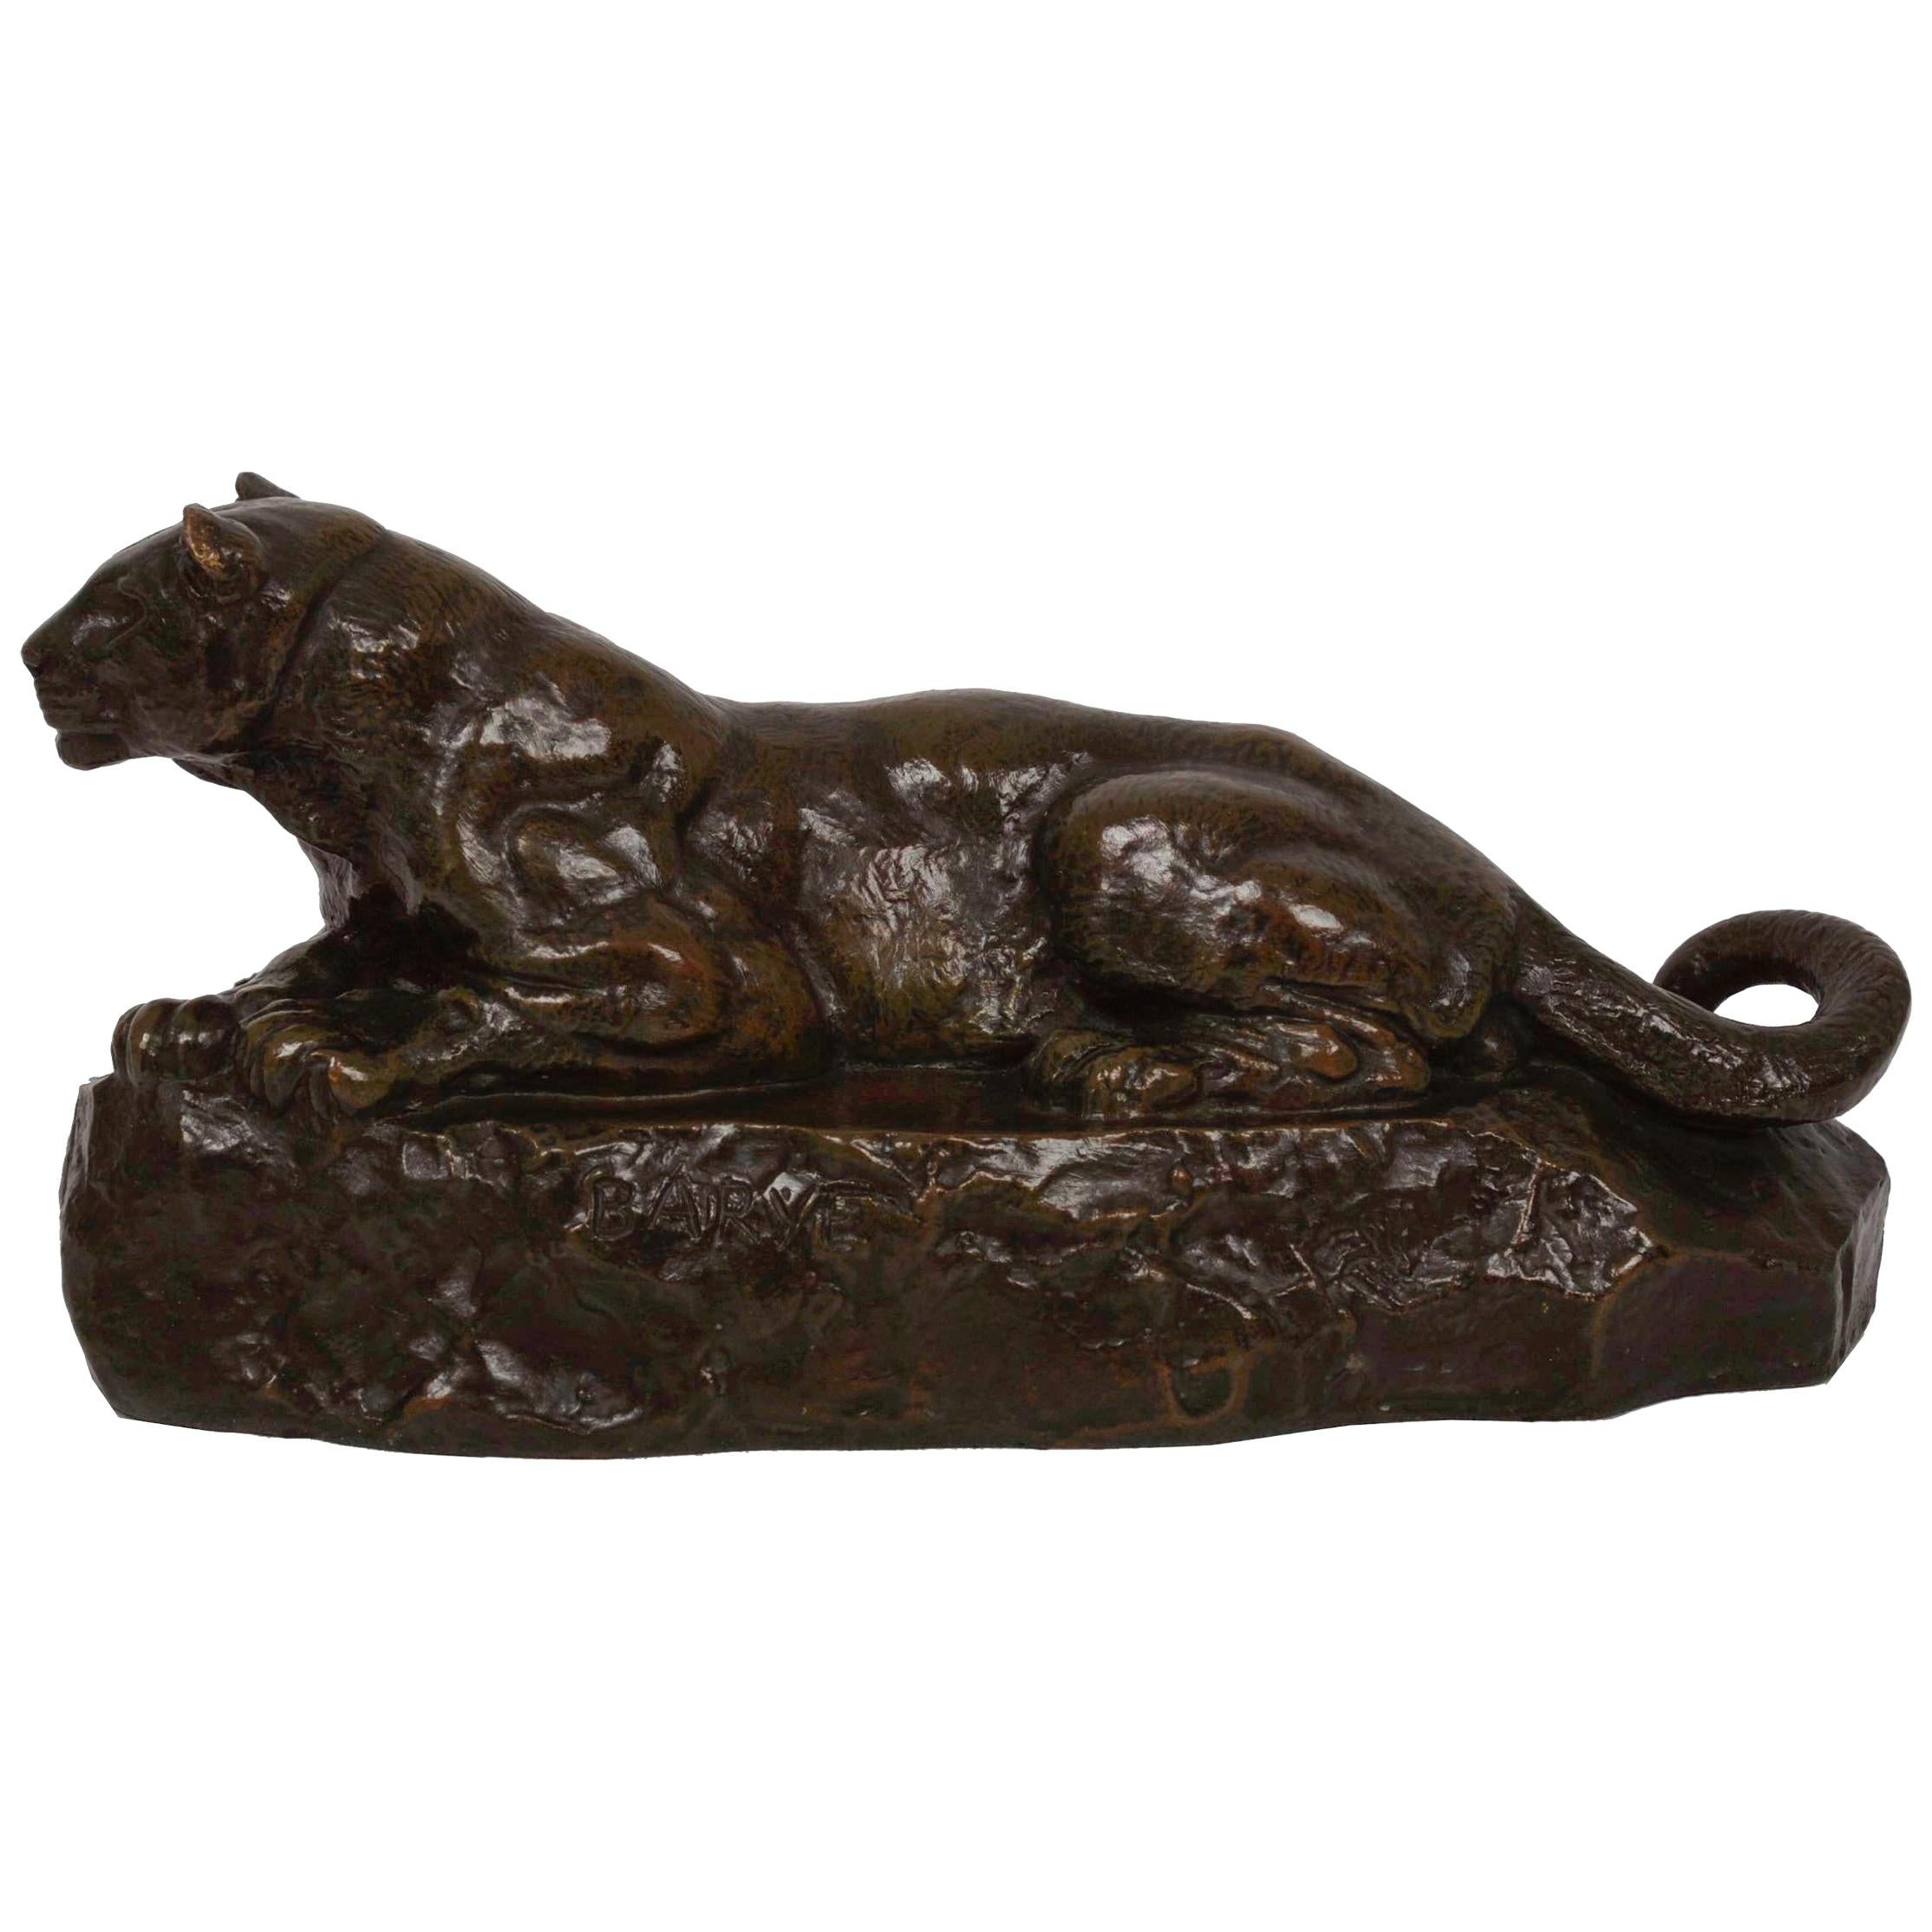 Bronze Sculpture "Panther of Tunisia" after Antoine-Louis Barye, Barbedienne